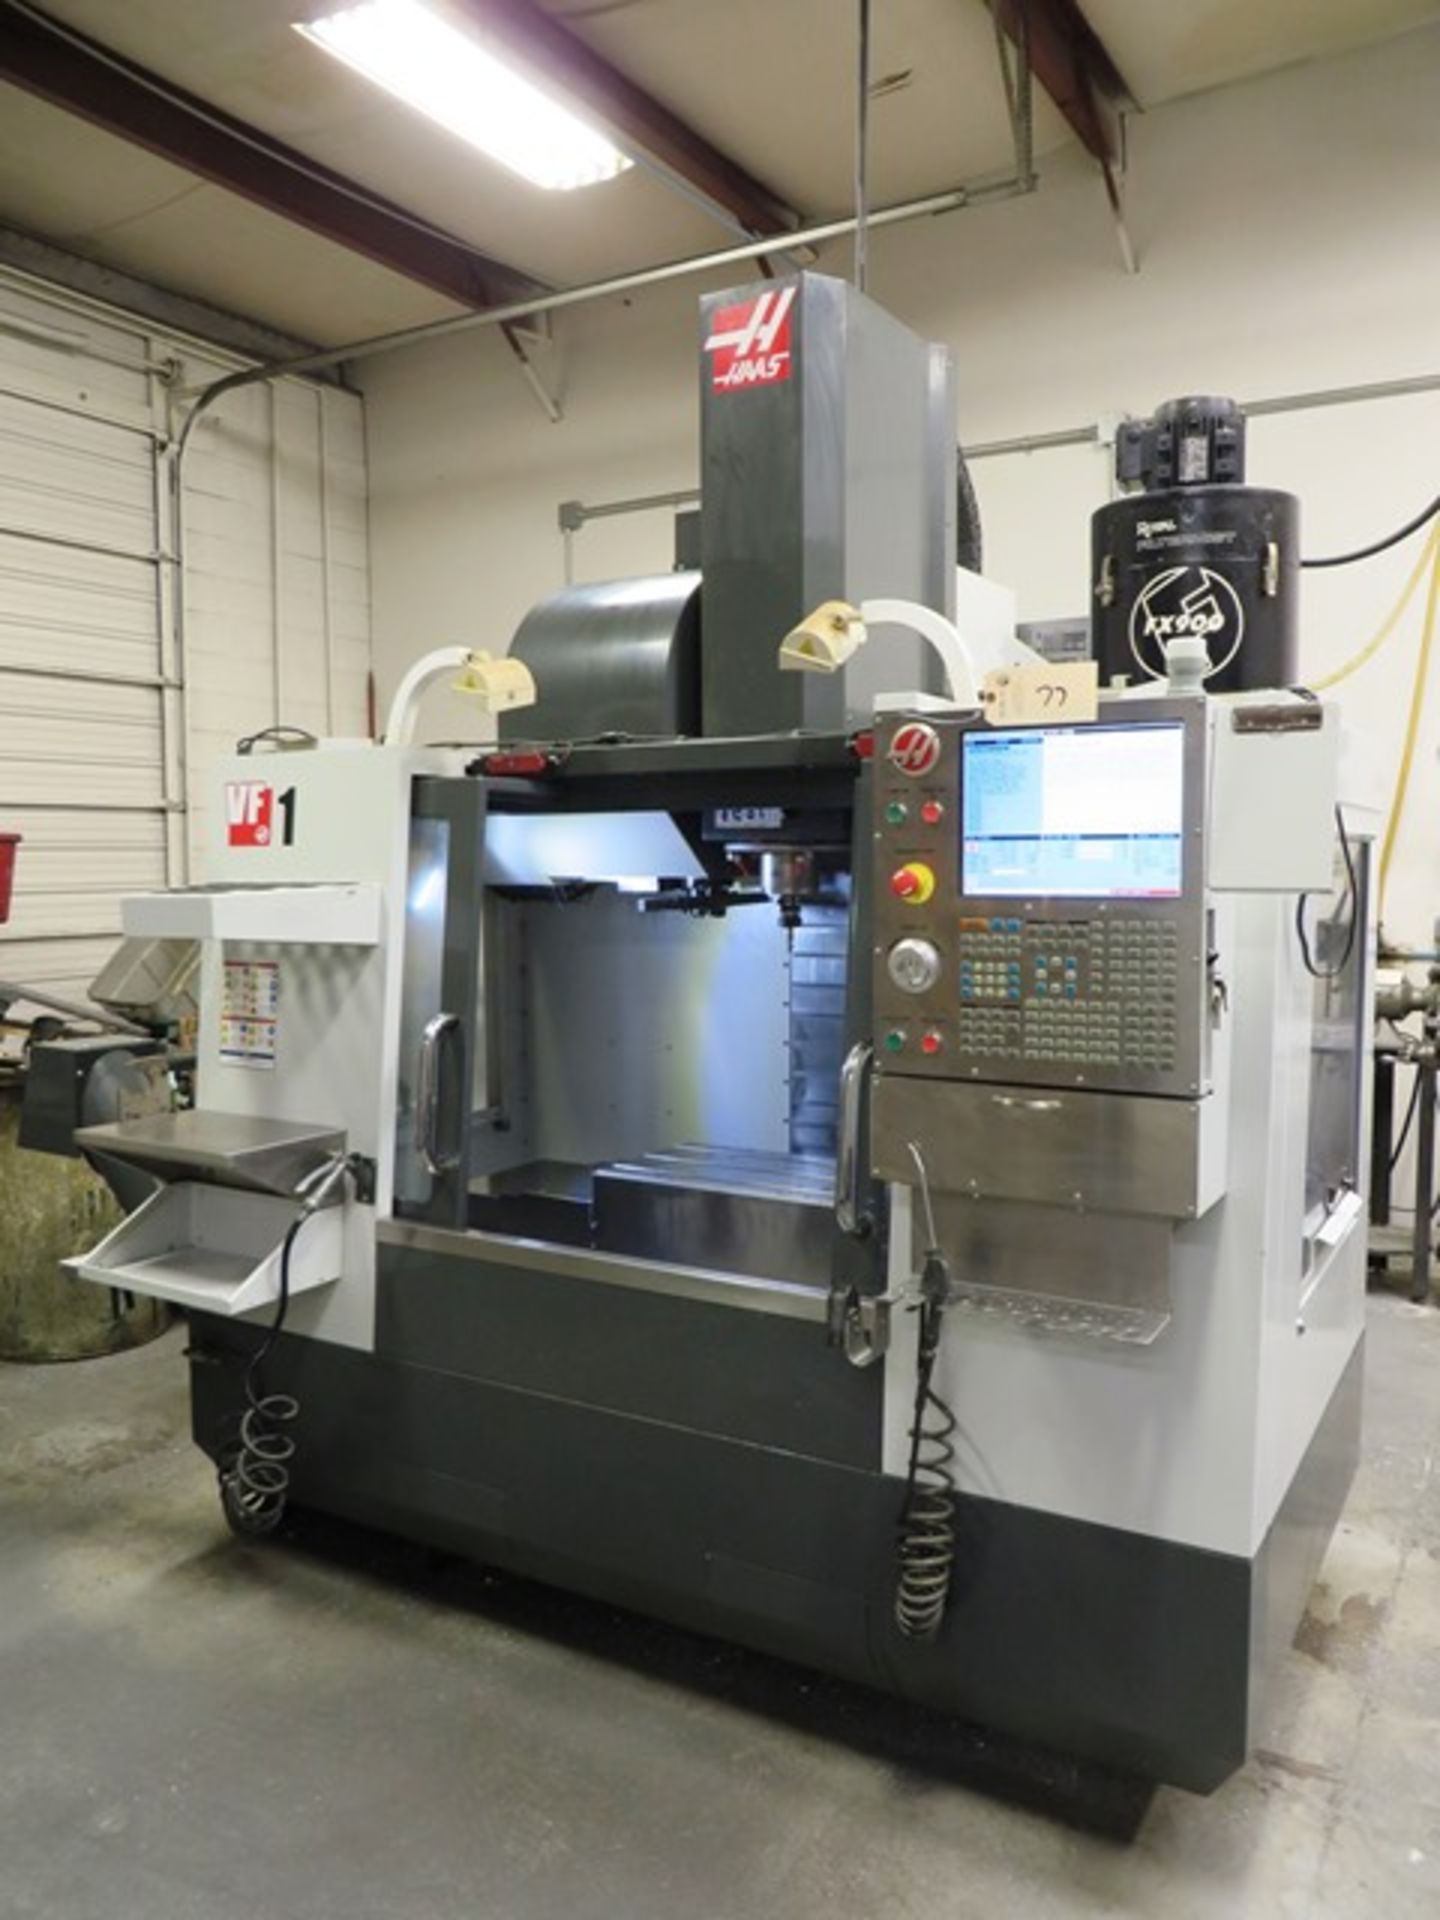 HAAS VF1 CNC Vertical Machining Center - Image 4 of 7